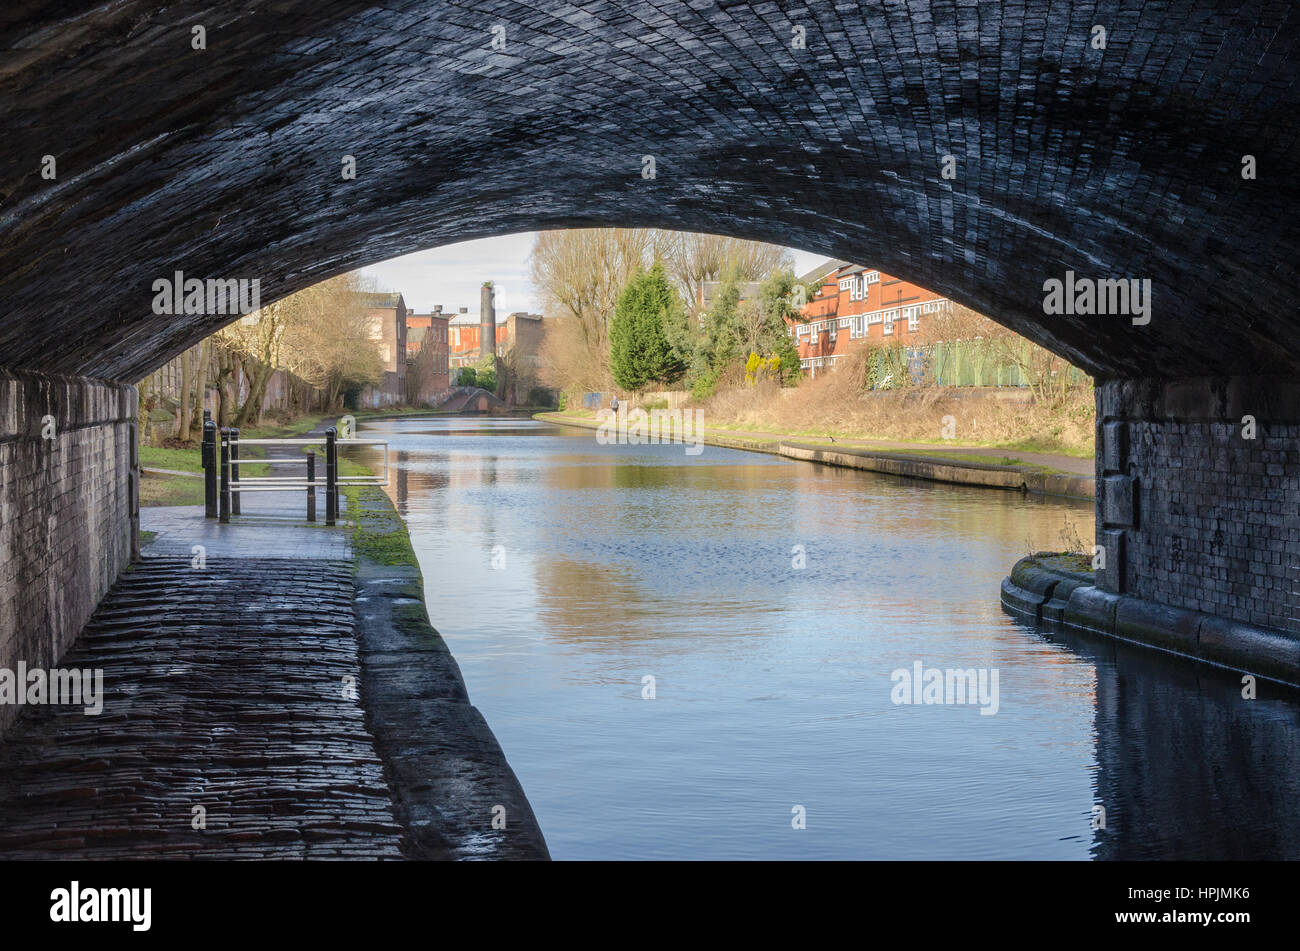 Birmingham Victorian Canals High Resolution Stock Photography and